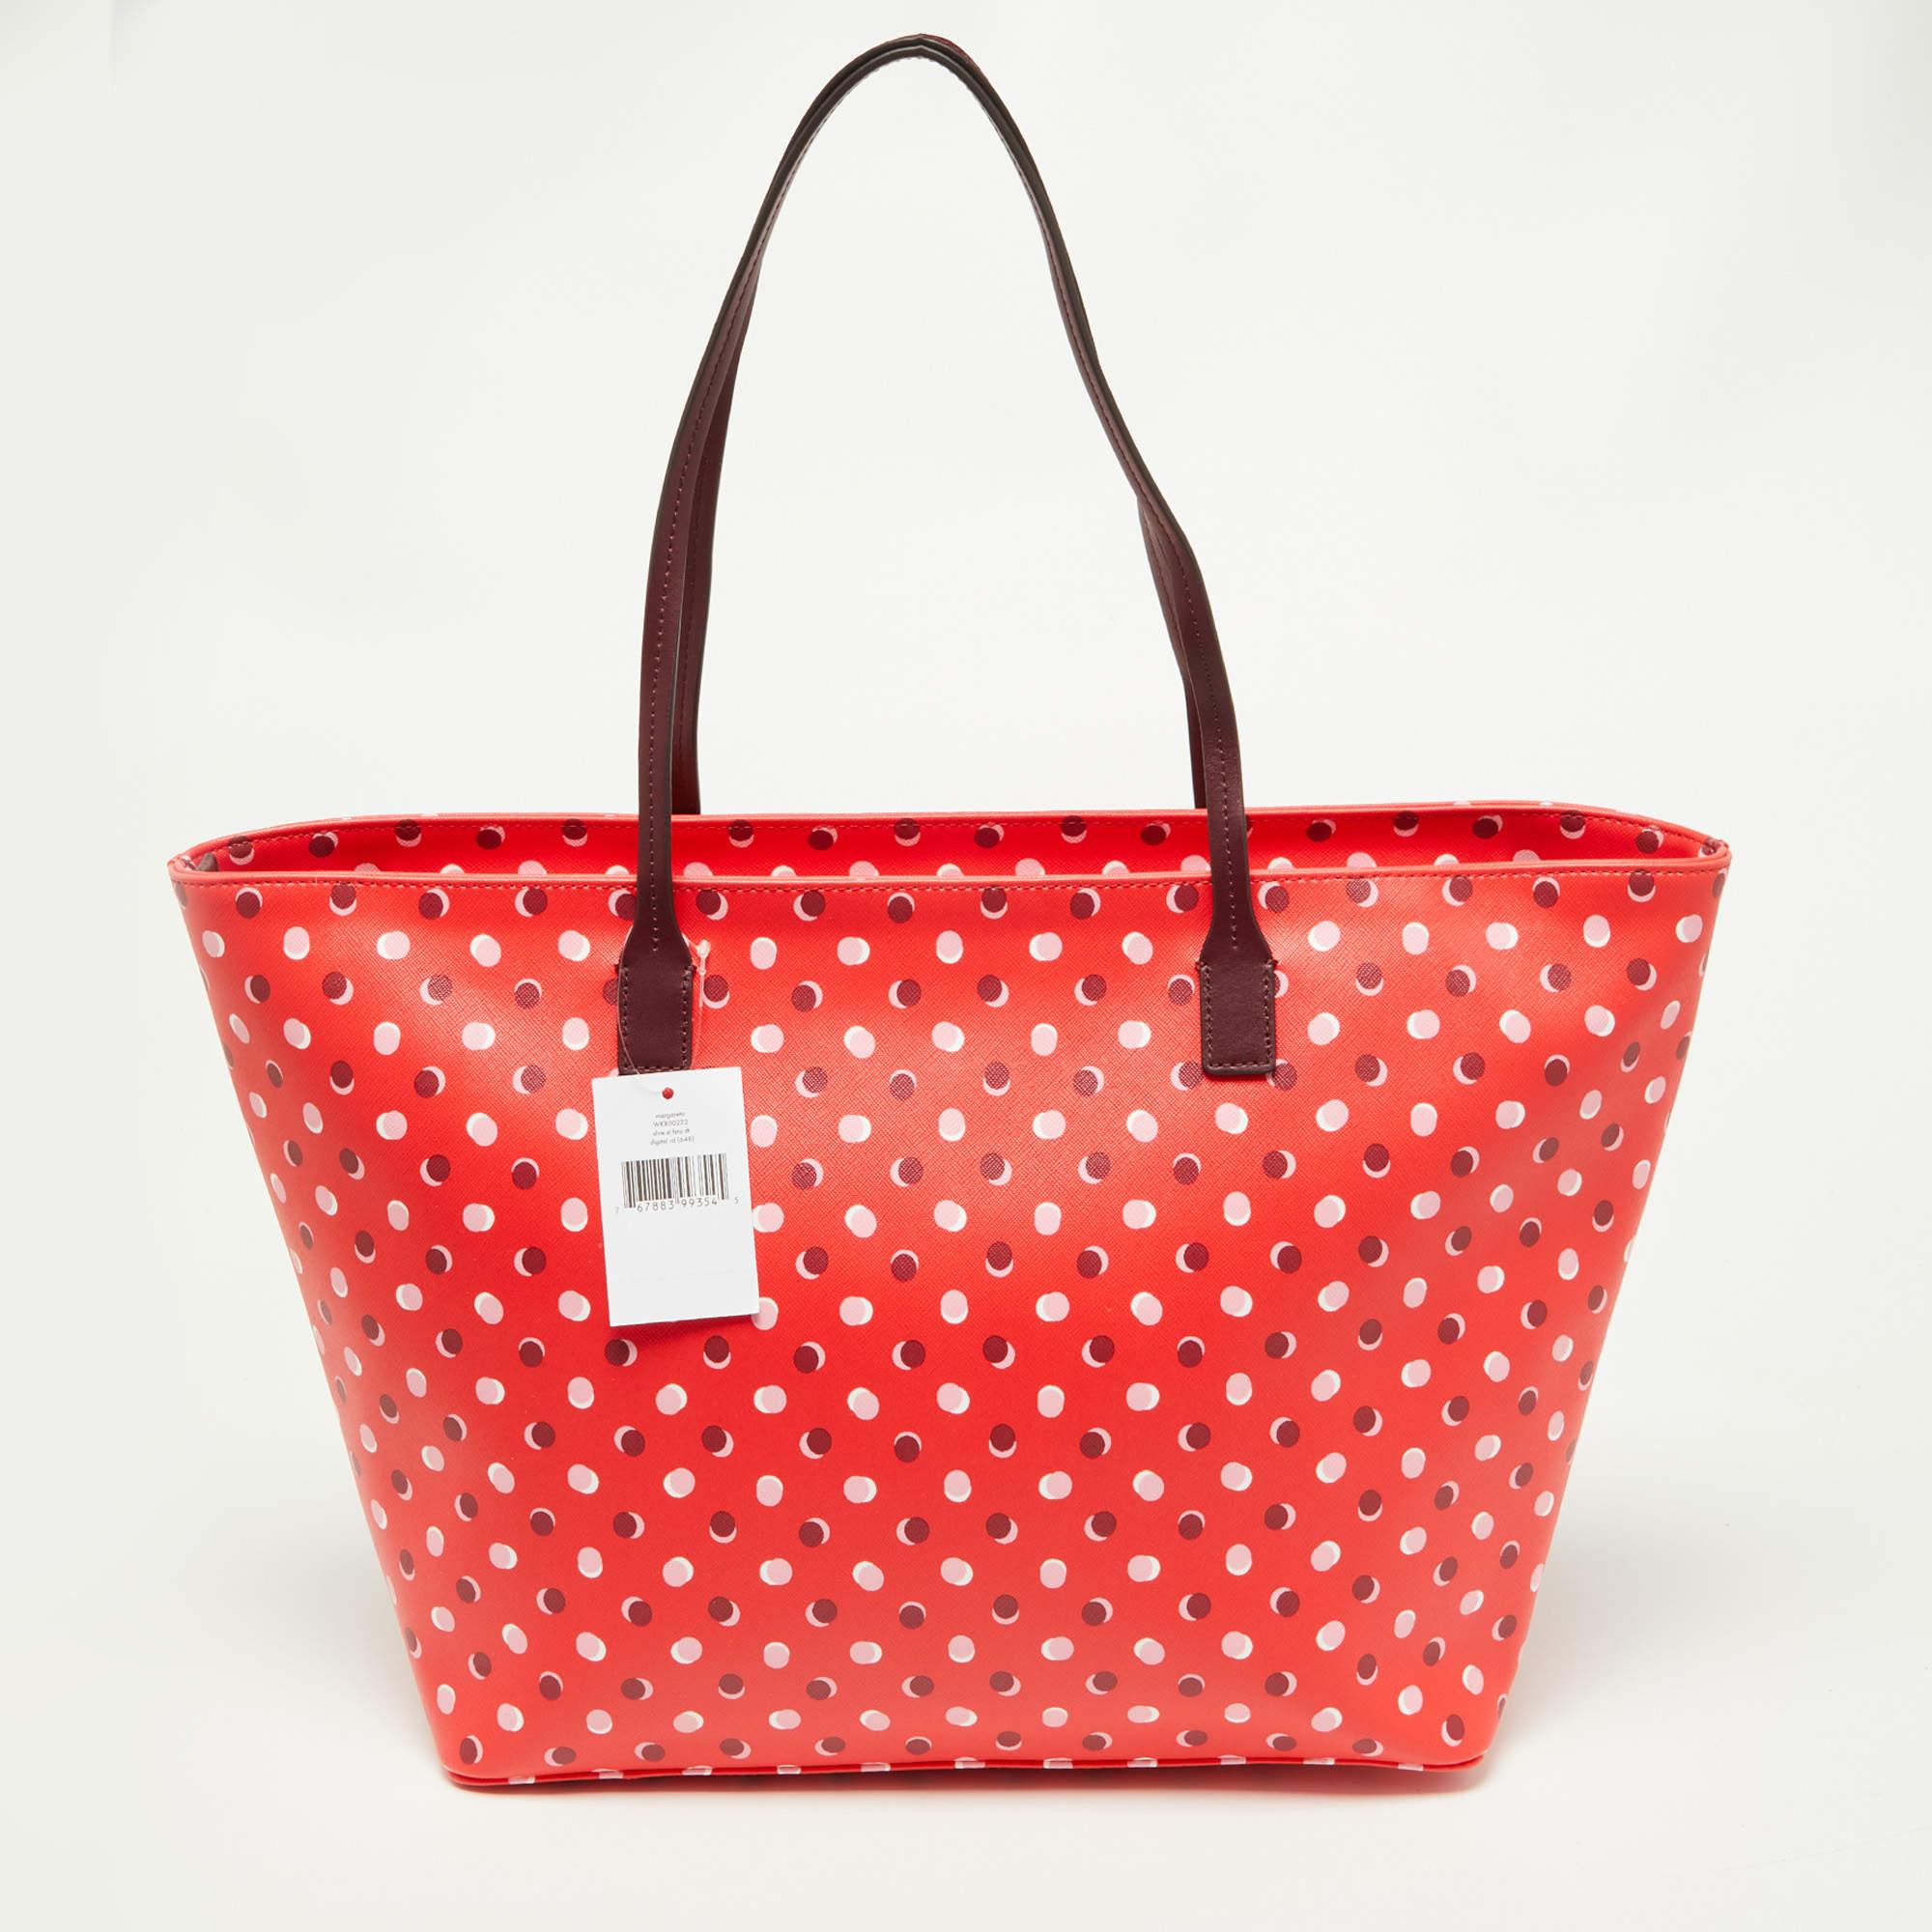 Created from high-quality materials, this tote is enriched with functional and classic elements. It can be carried around conveniently, and its interior is perfectly sized to keep your belongings with ease.

Includes: Info Booklet, Brand Tag